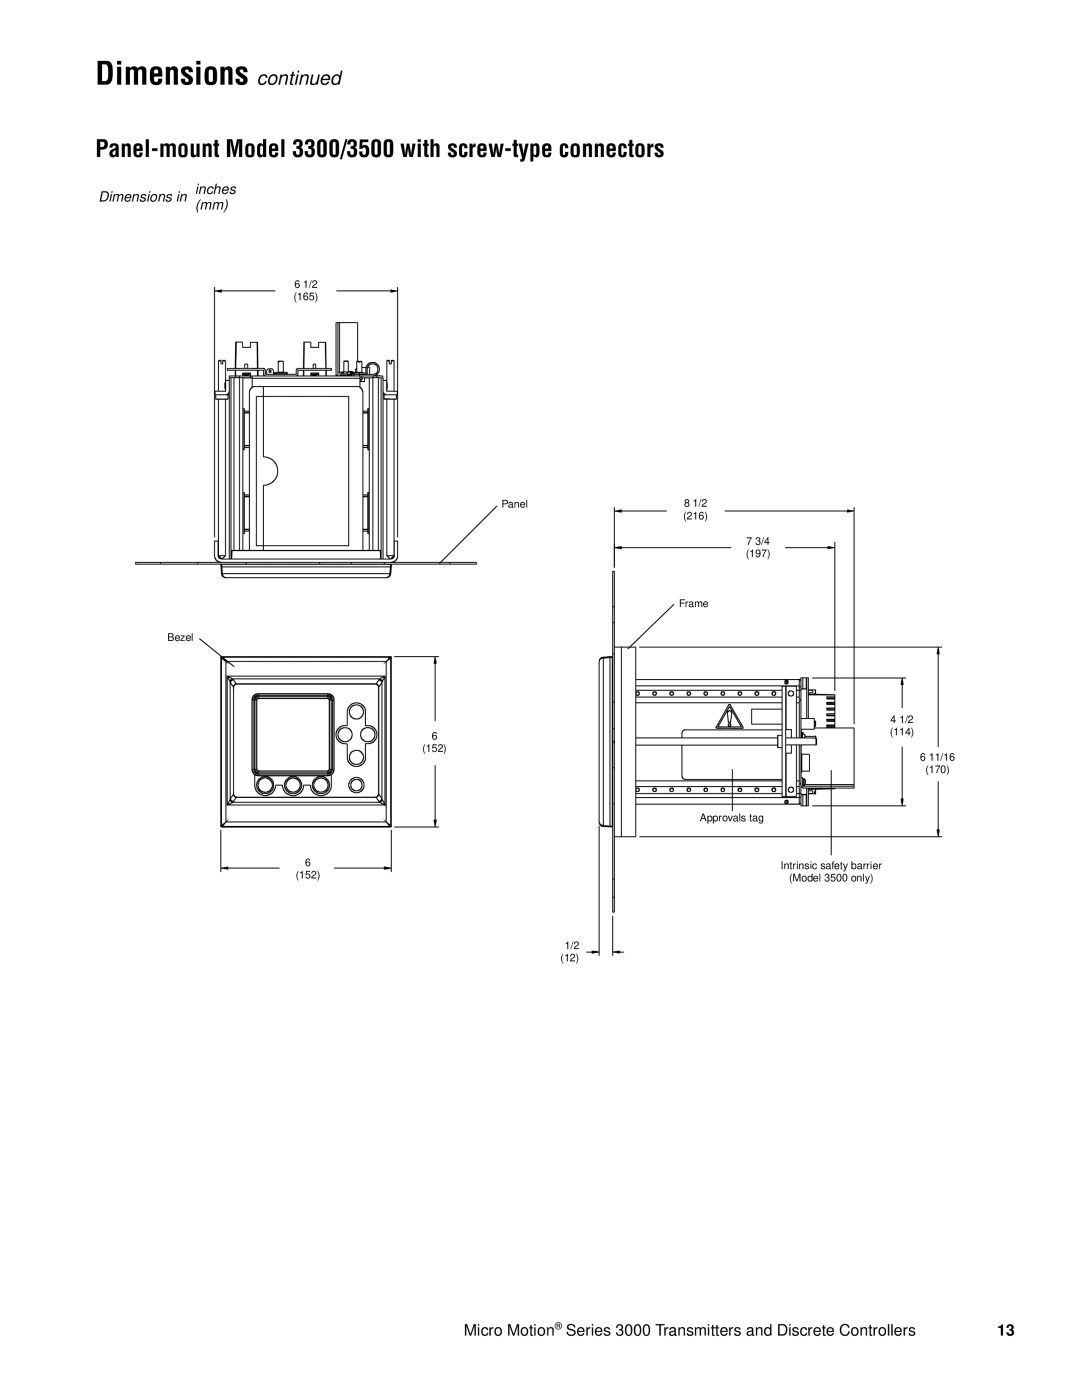 Emerson Series 3000 manual Dimensions continued, Dimensions in, inches 